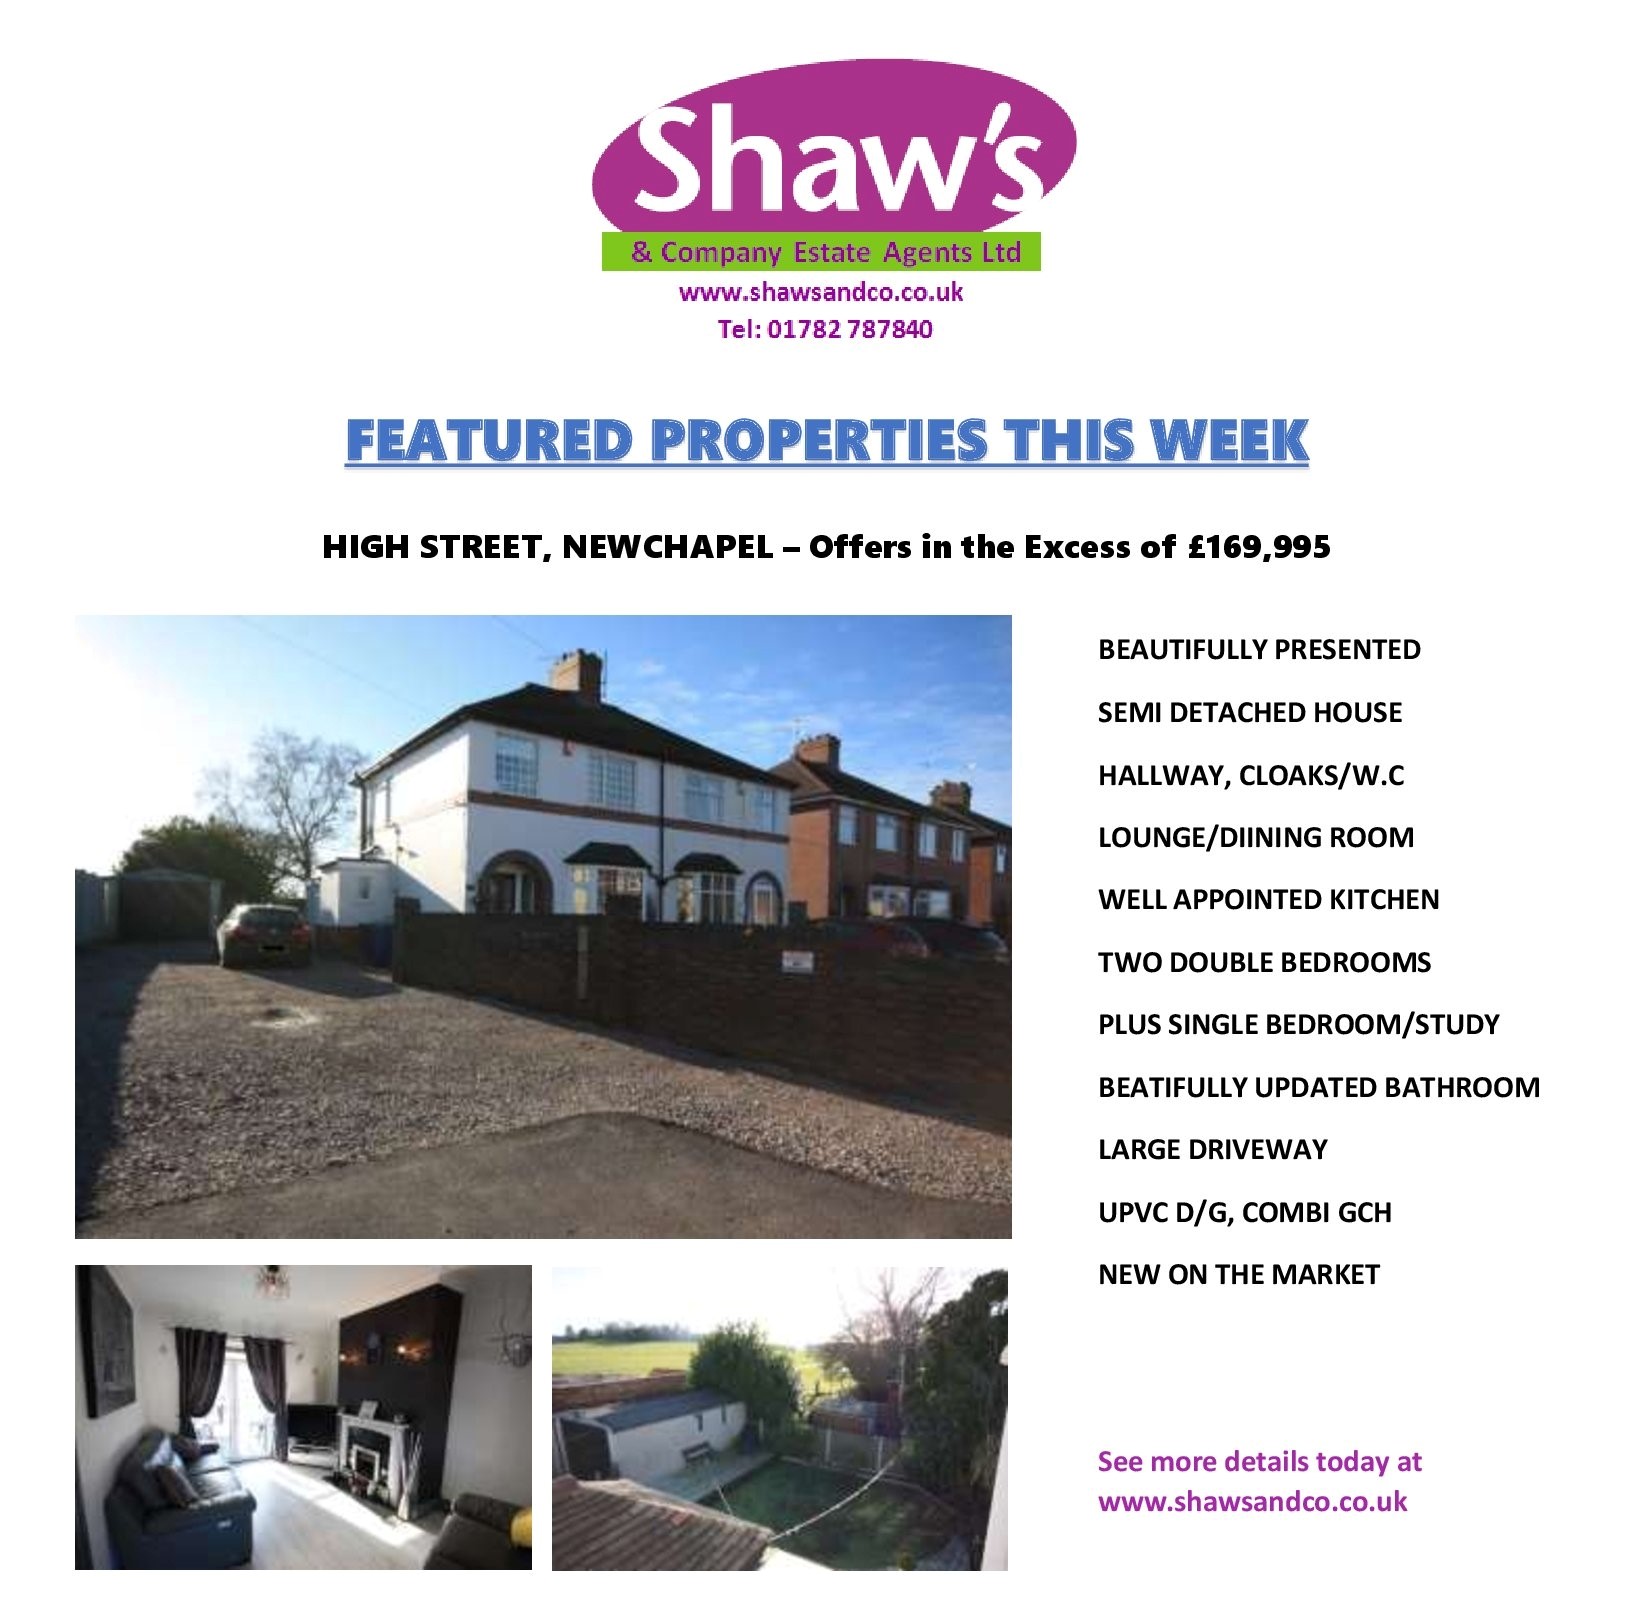 FEATURED PROPERTIES OF THE WEEK!